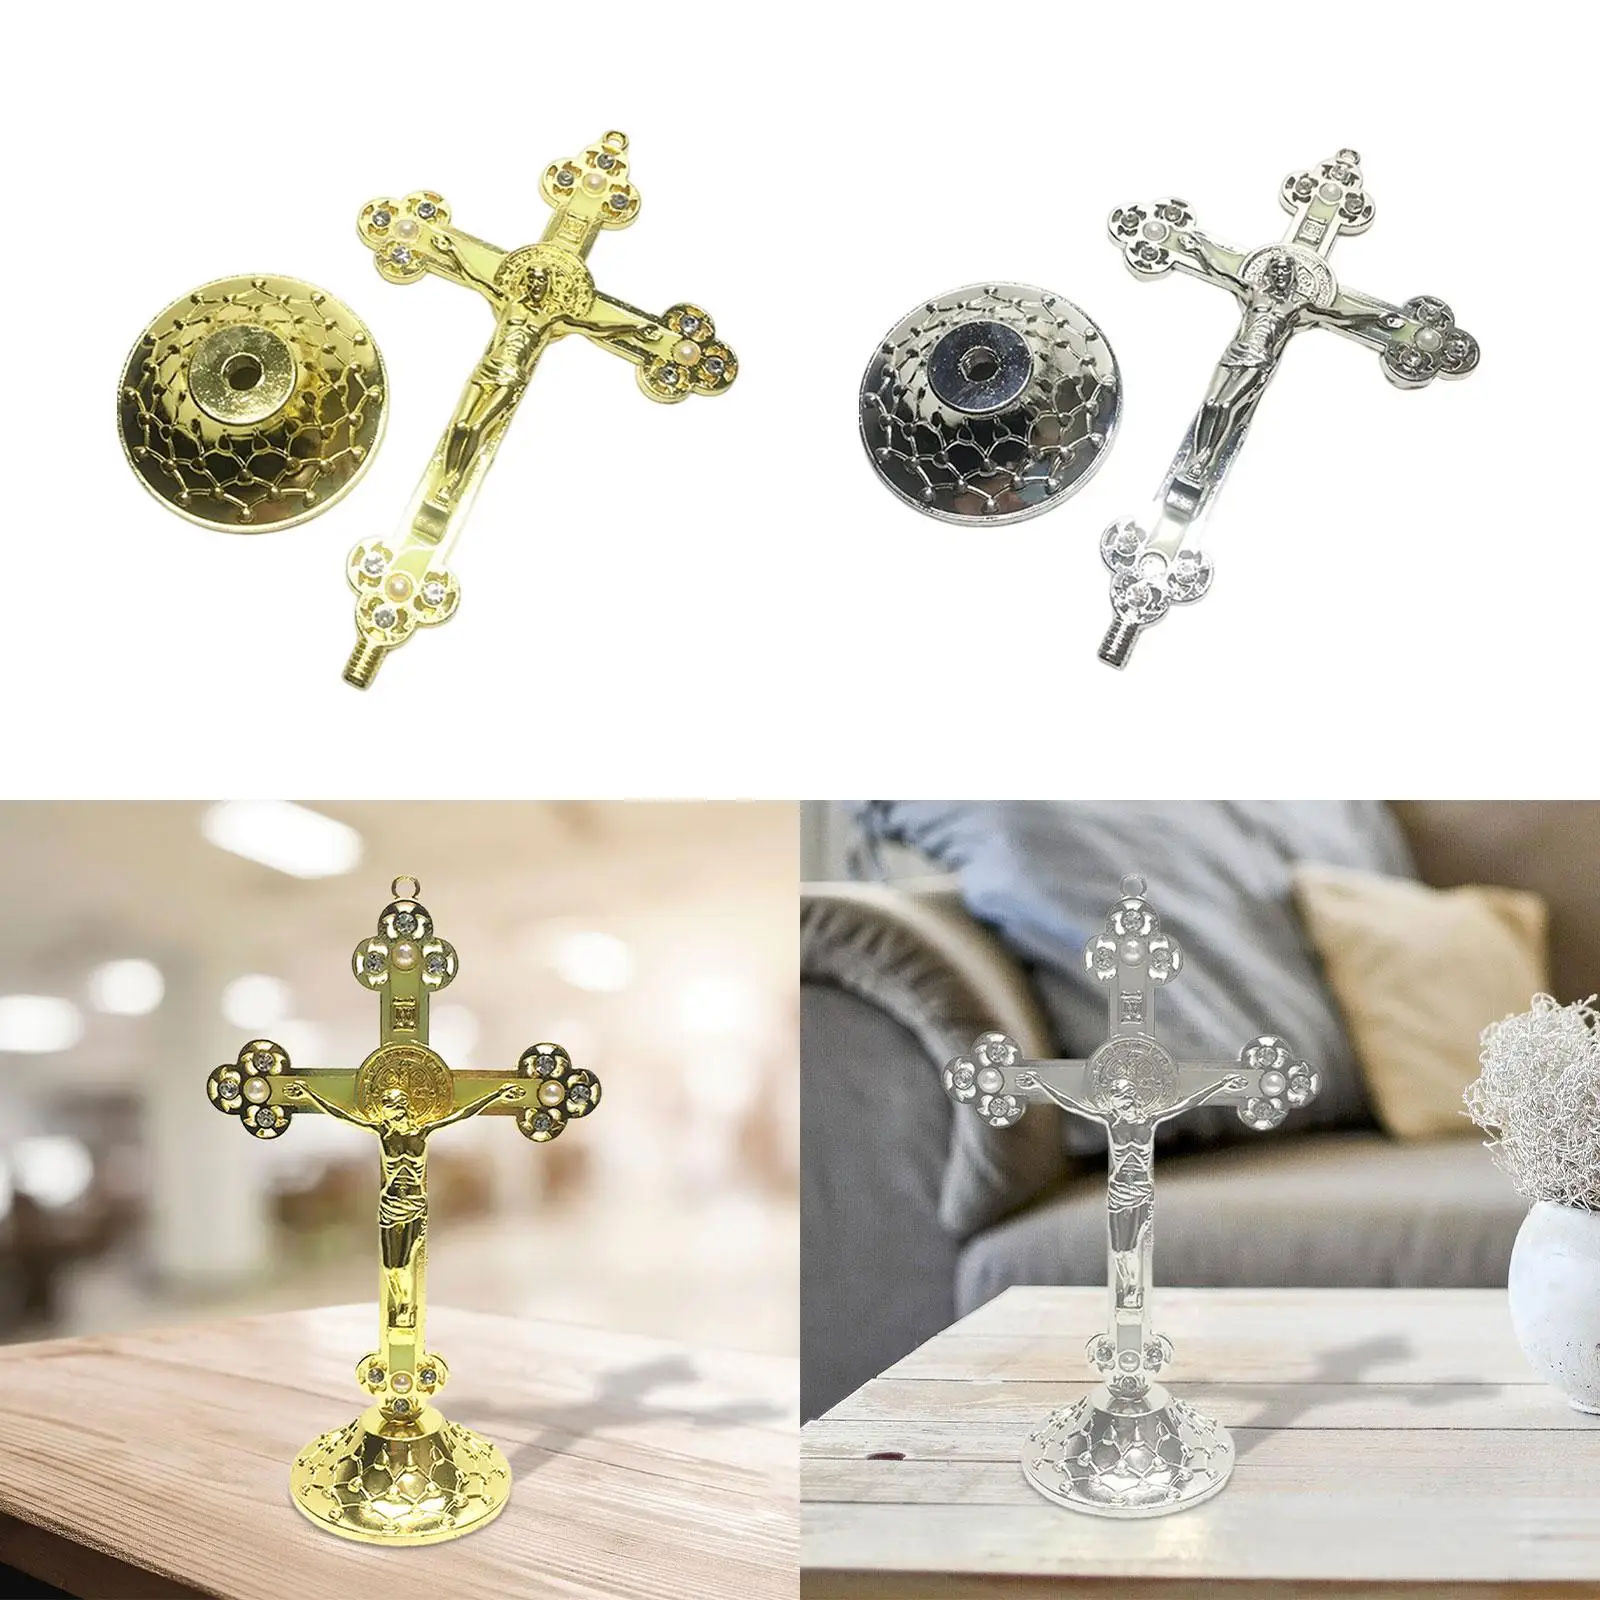 Crucifix Figurine Catholic Collection Figurine Religious Cross Statue for Shelf Living Room Easter Thanksgiving Home Decoration